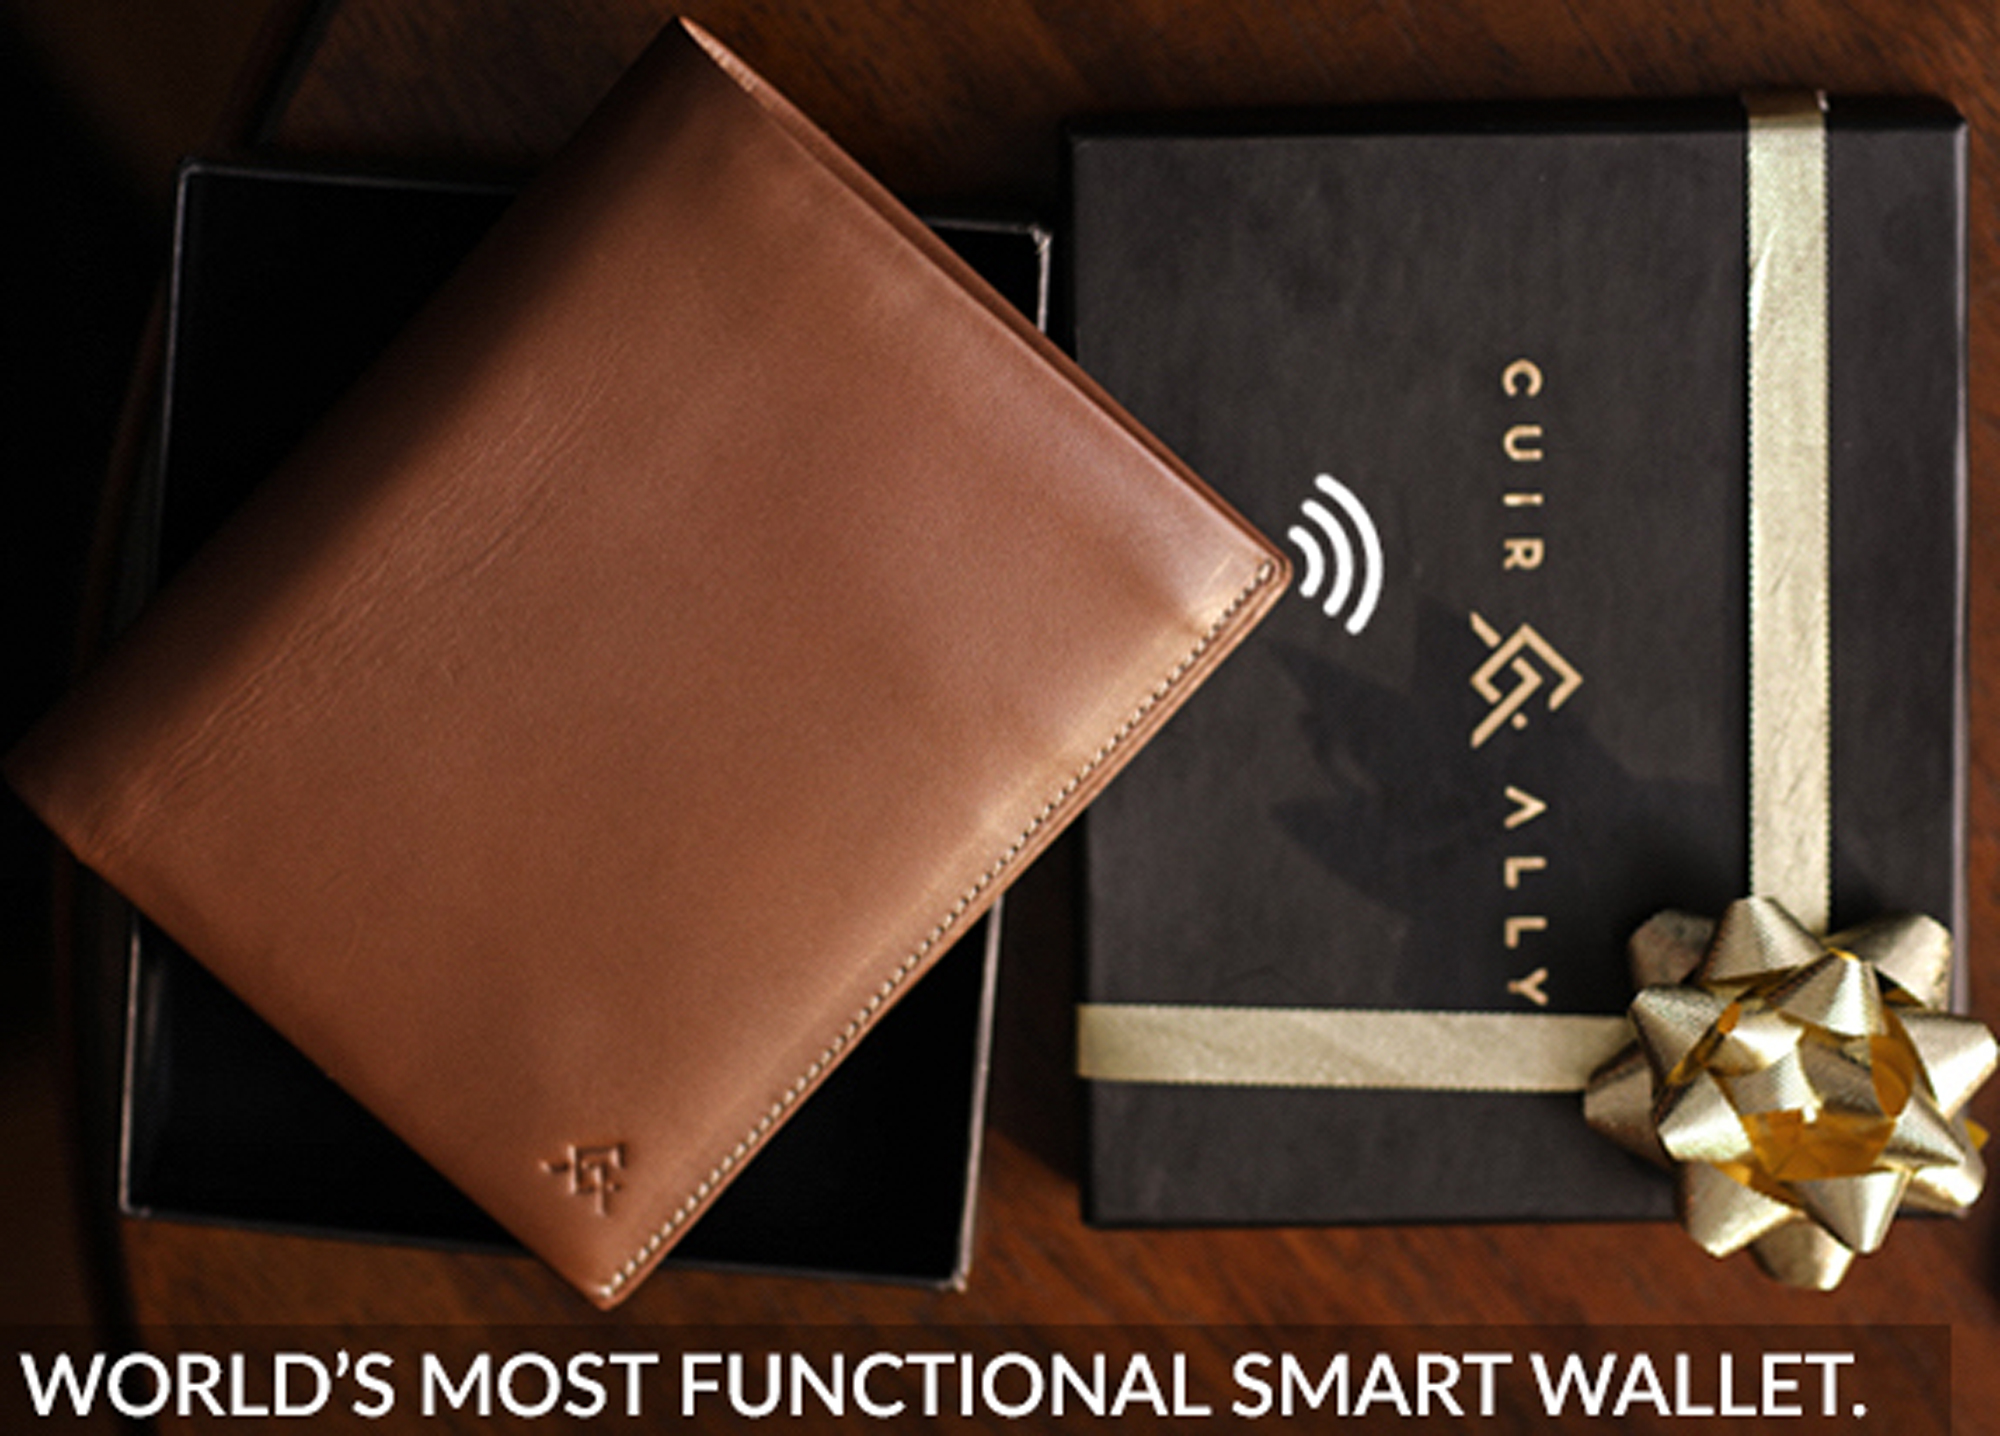 The World's Most Functional Smart Wallet - Voyager Smart by CUIR ALLY, Fueladream